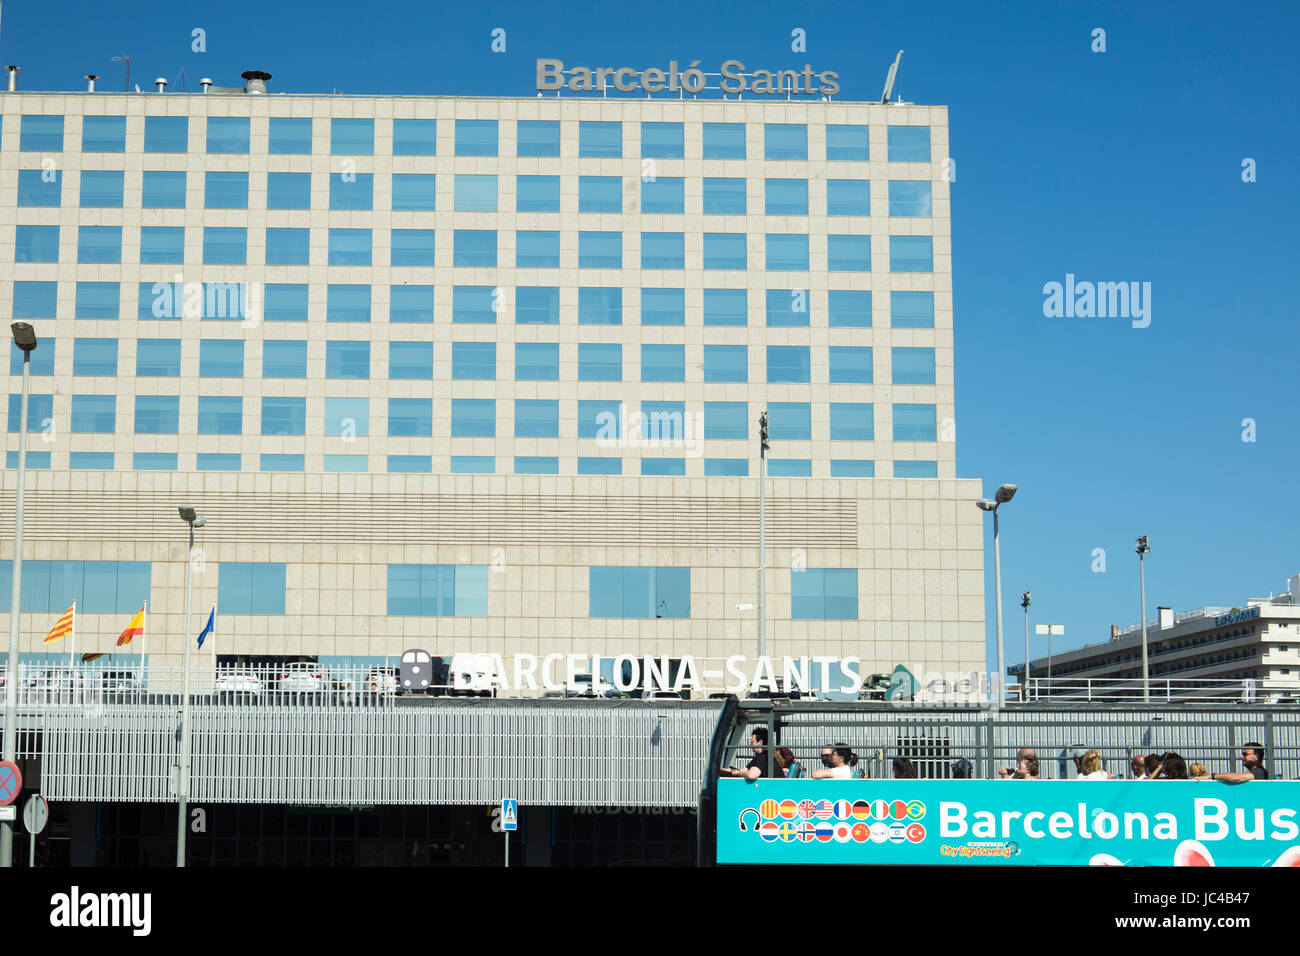 Barcelona, Spain - September 27. 2016: Building of Barcelo Sants railway station in Barcelona city and a touristic bus, which drives through the city  Stock Photo